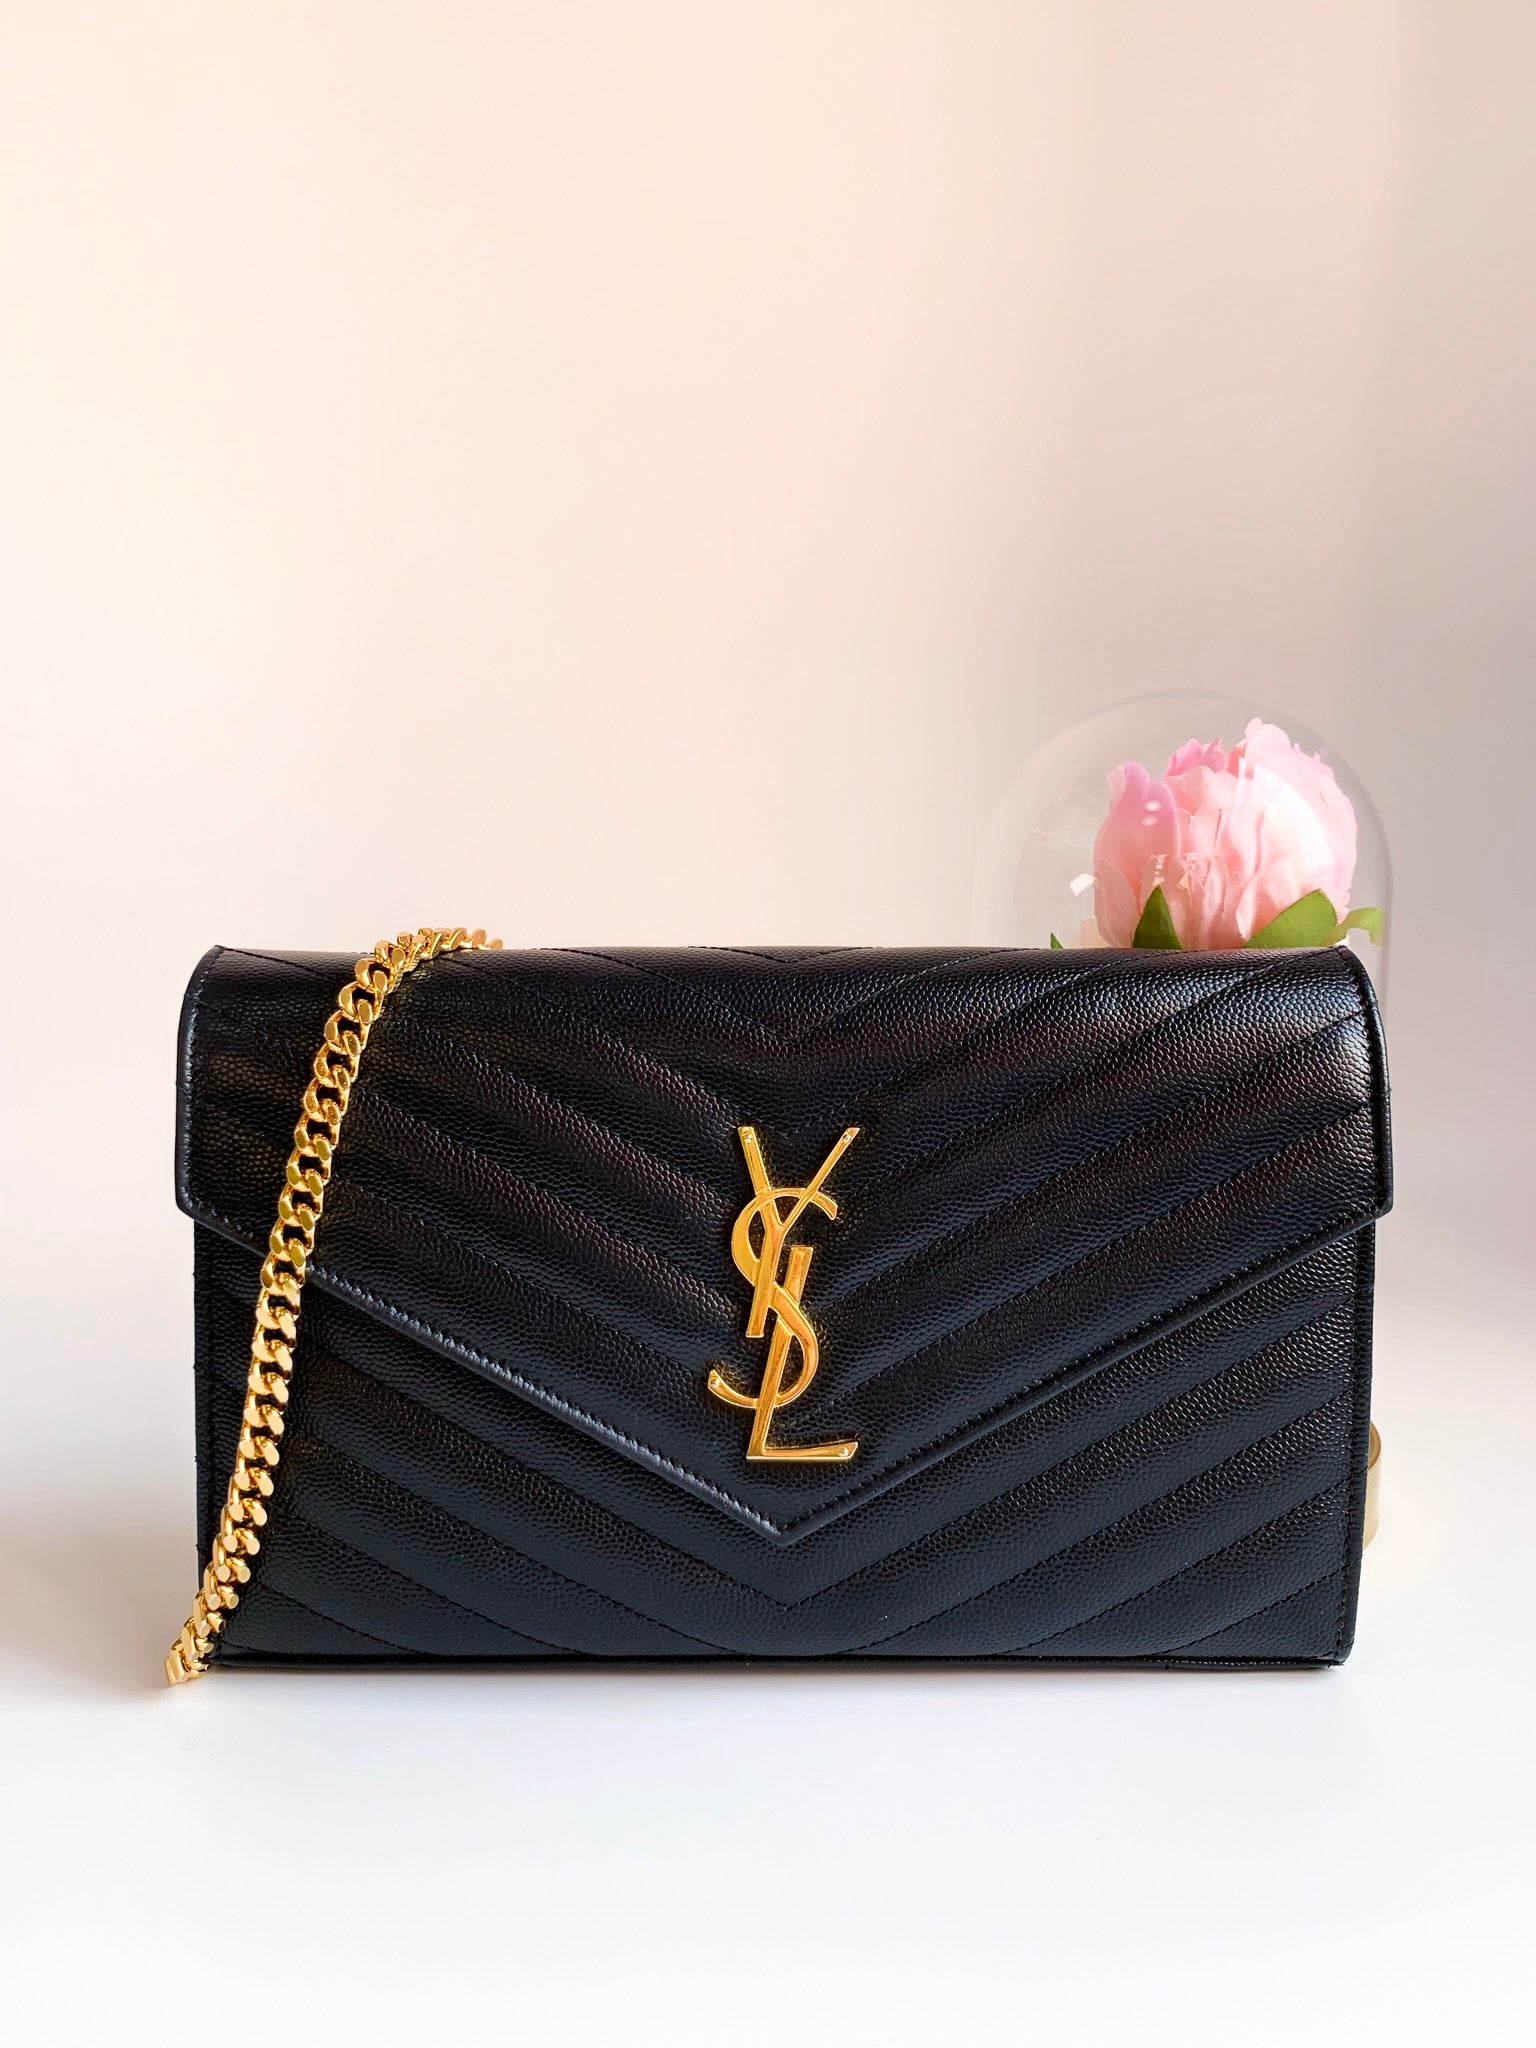 Saint Laurent YSL Medium / Large Wallet on Chain WOC in Red Grained Leather  and GHW